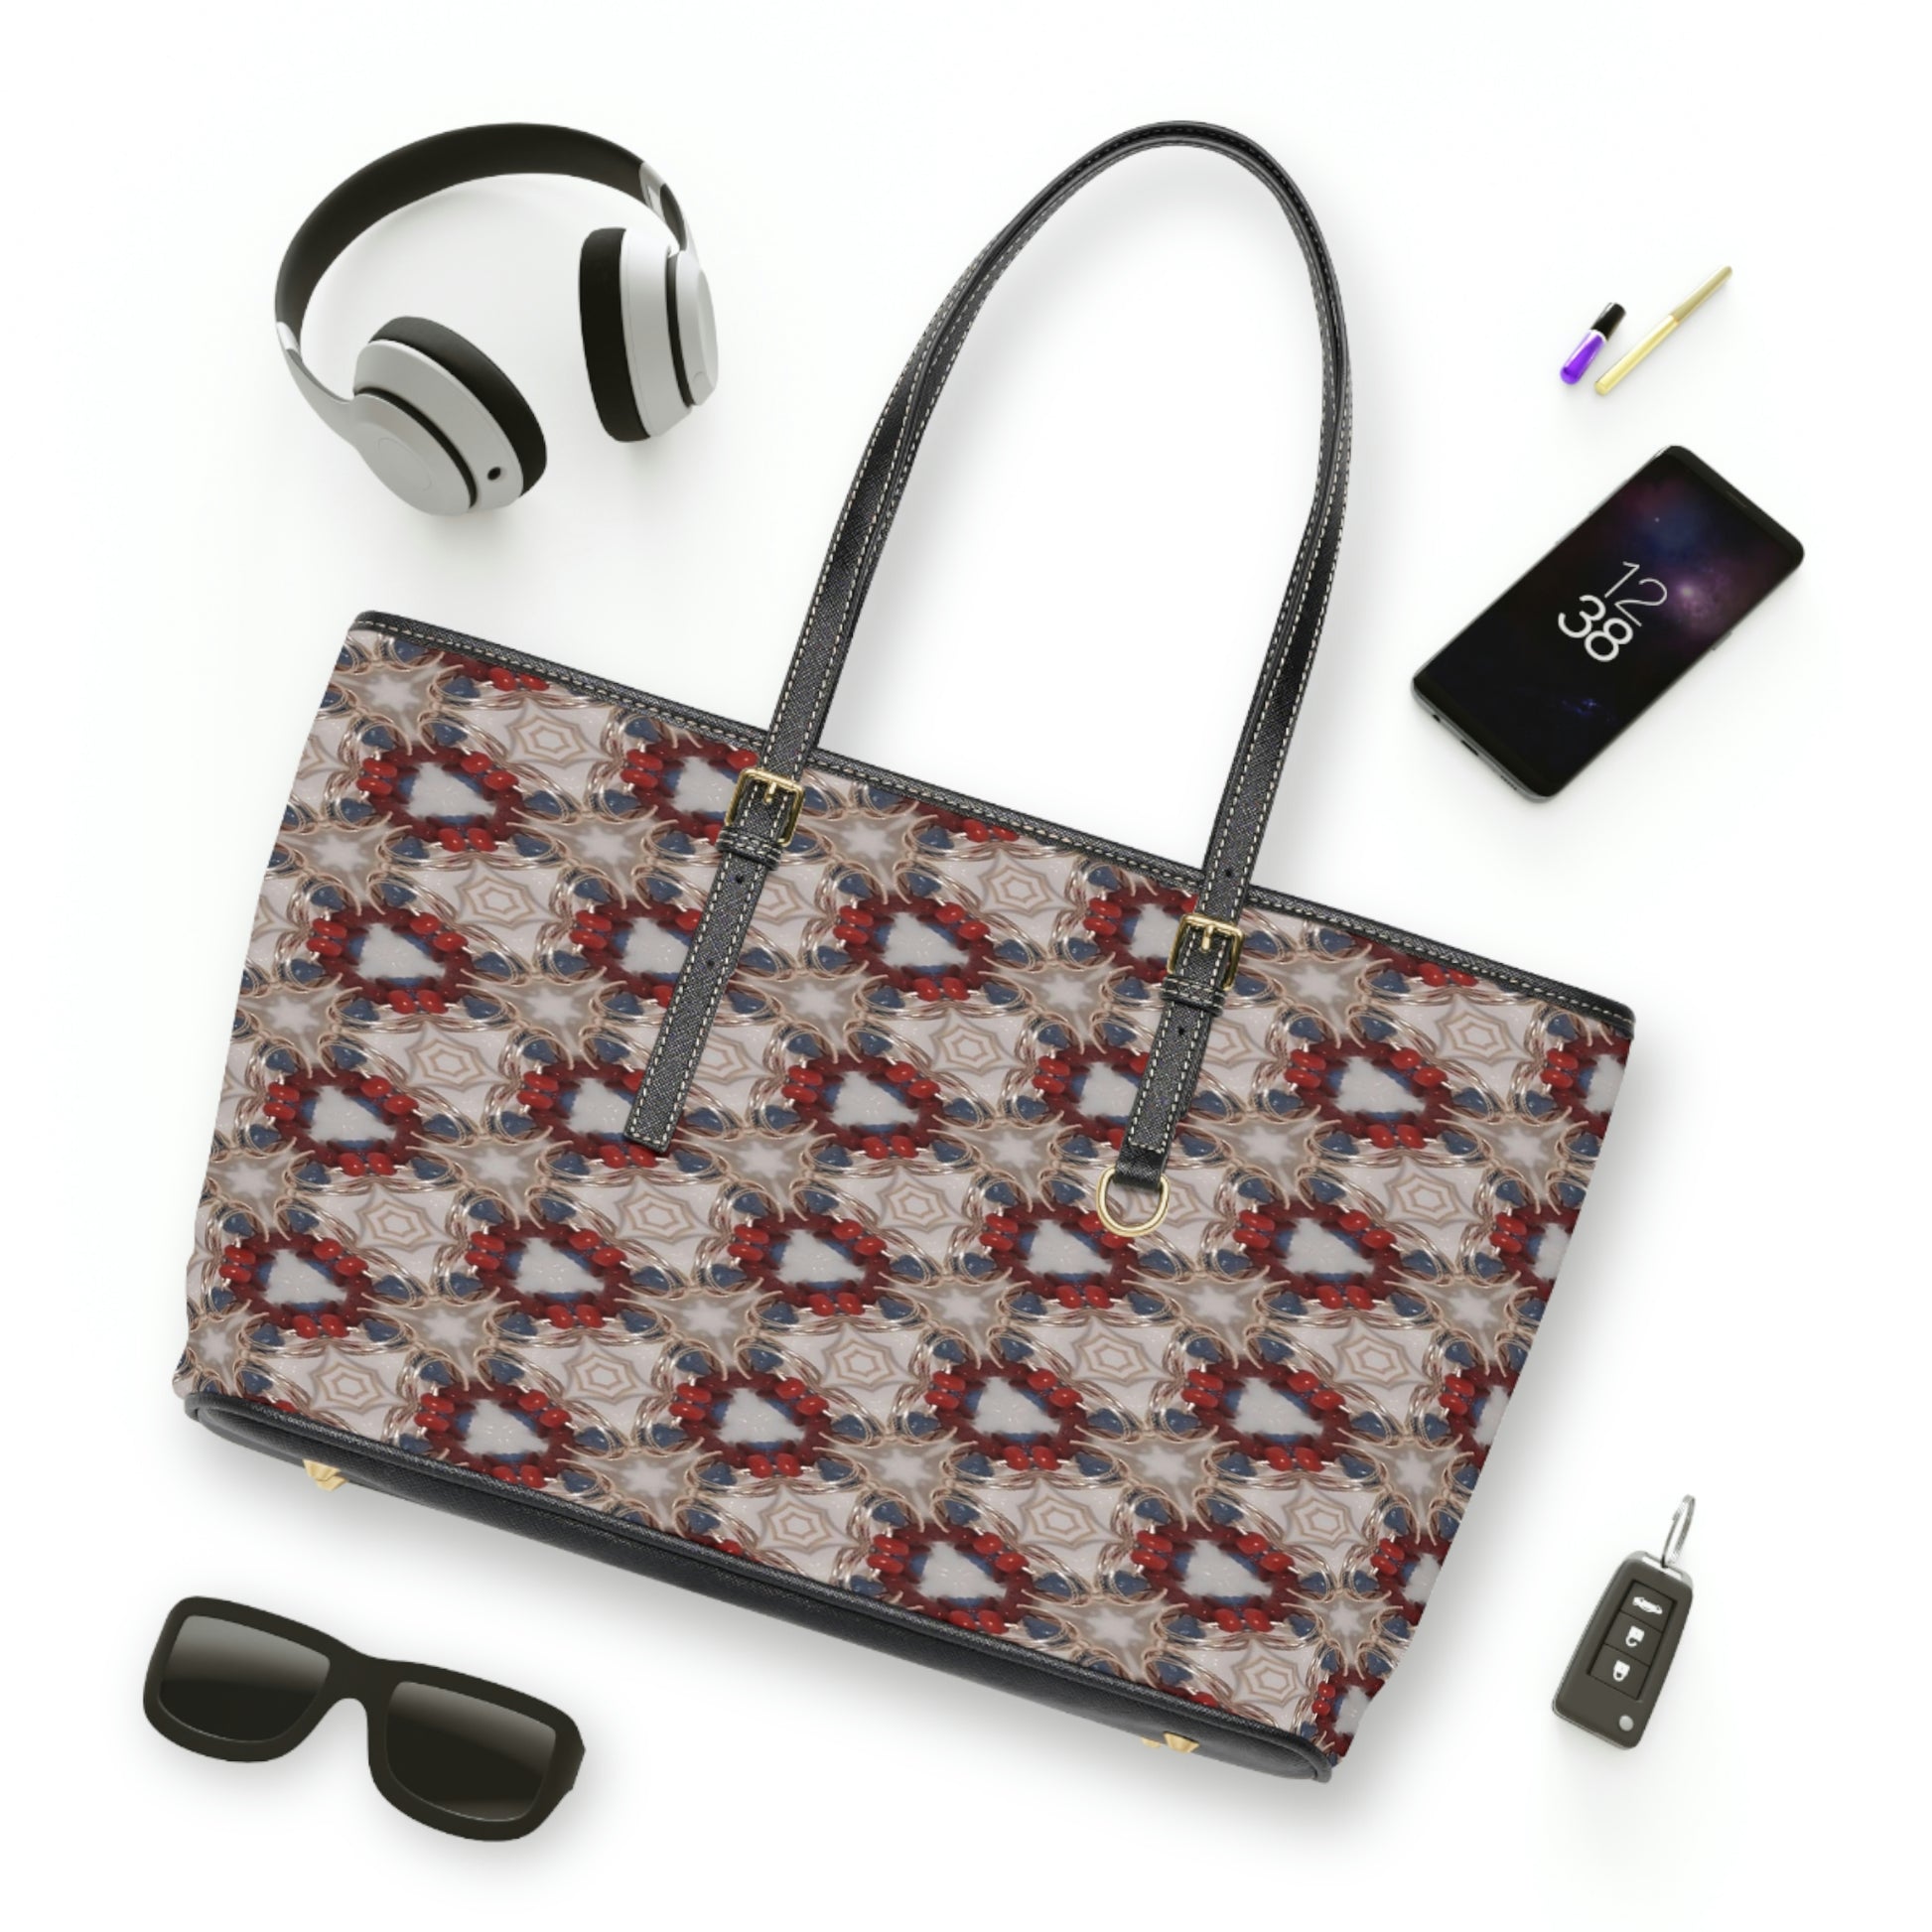 Abstract PU Leather Shoulder Bag - O By Onica Online Store